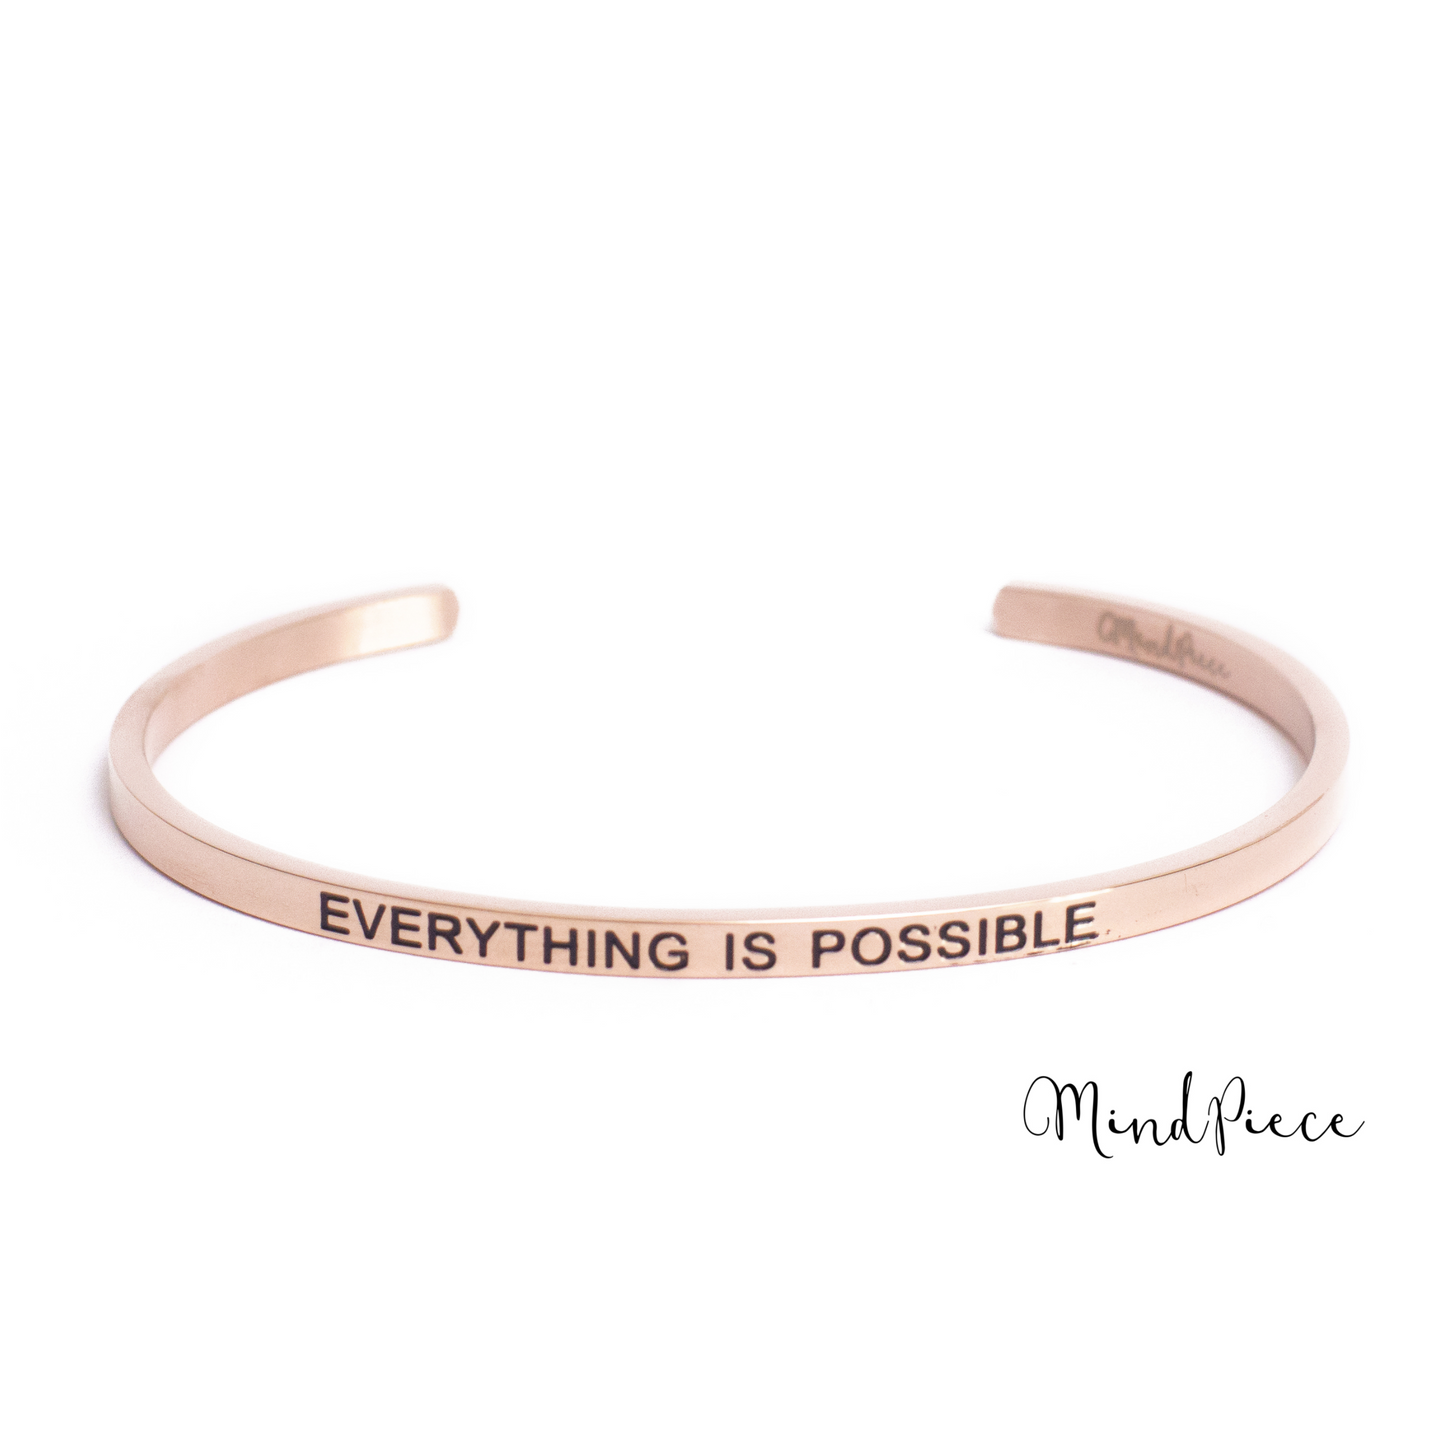 Bracelet | everything is possible (1 pcs) - silver & rose